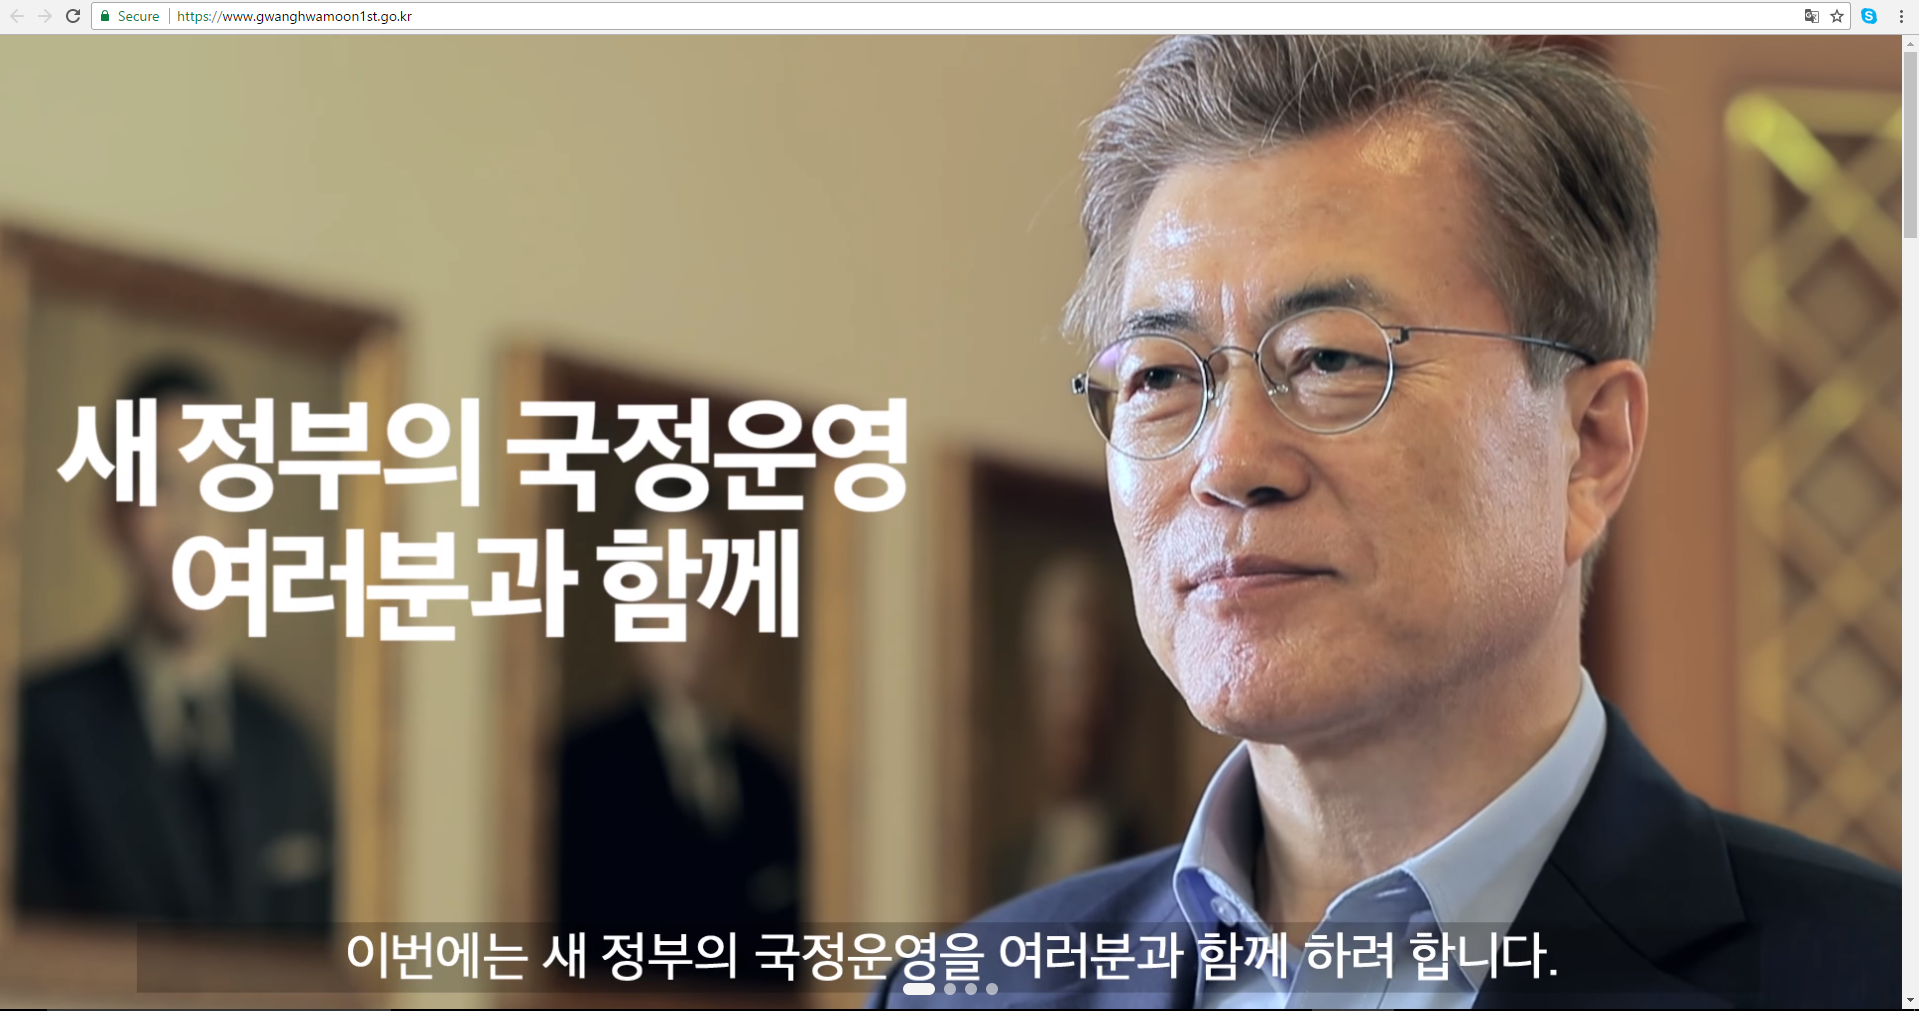 President Moon accepts foreigners’ complaints. Send yours TODAY!